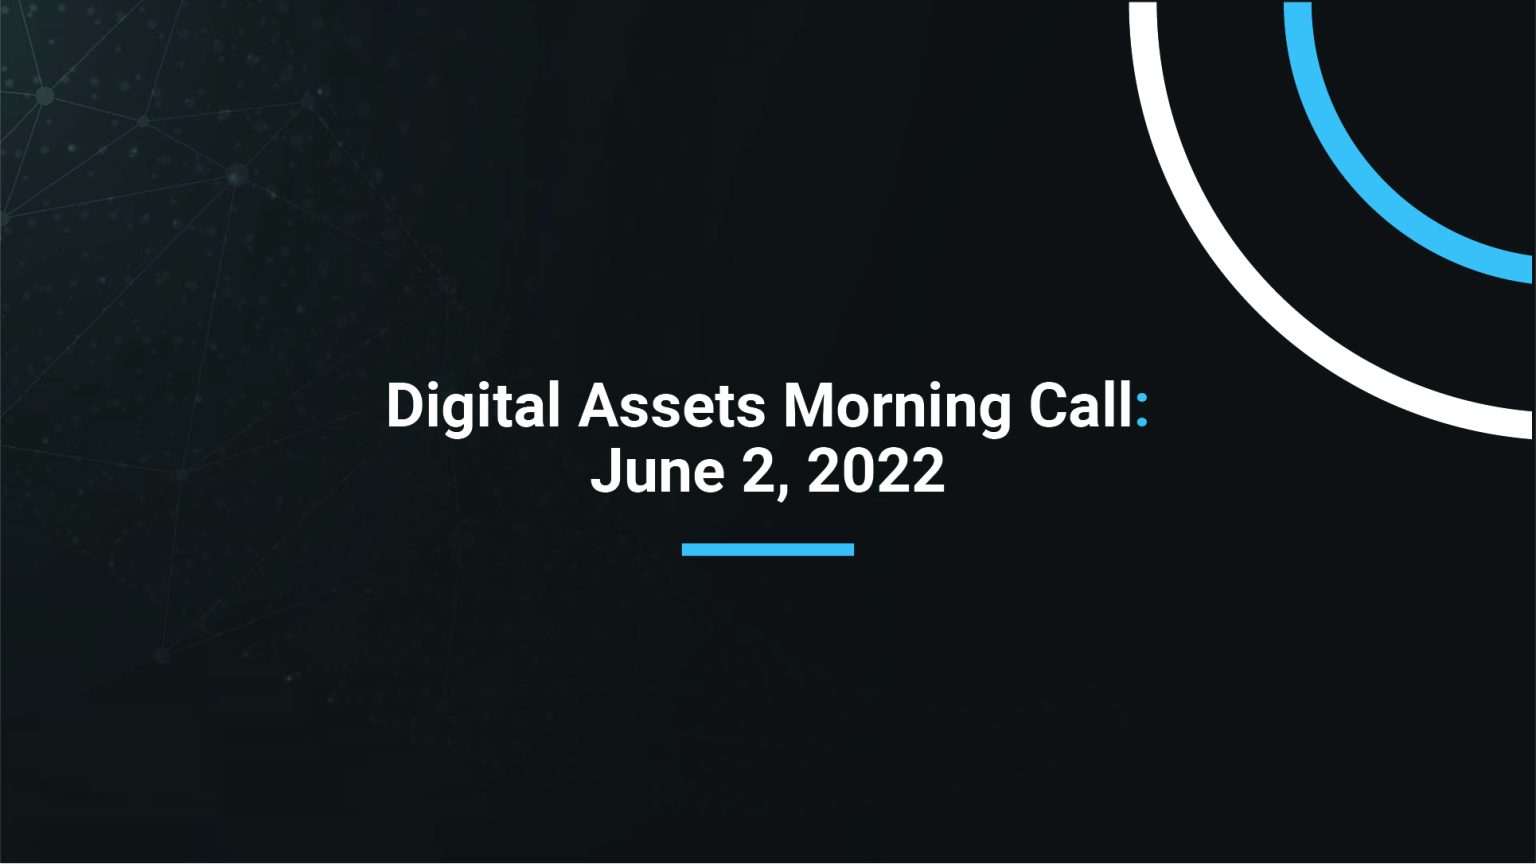 Digital Assets Morning Call: June 2 2022 - Industry developments highlight continued growth and demand for crypto